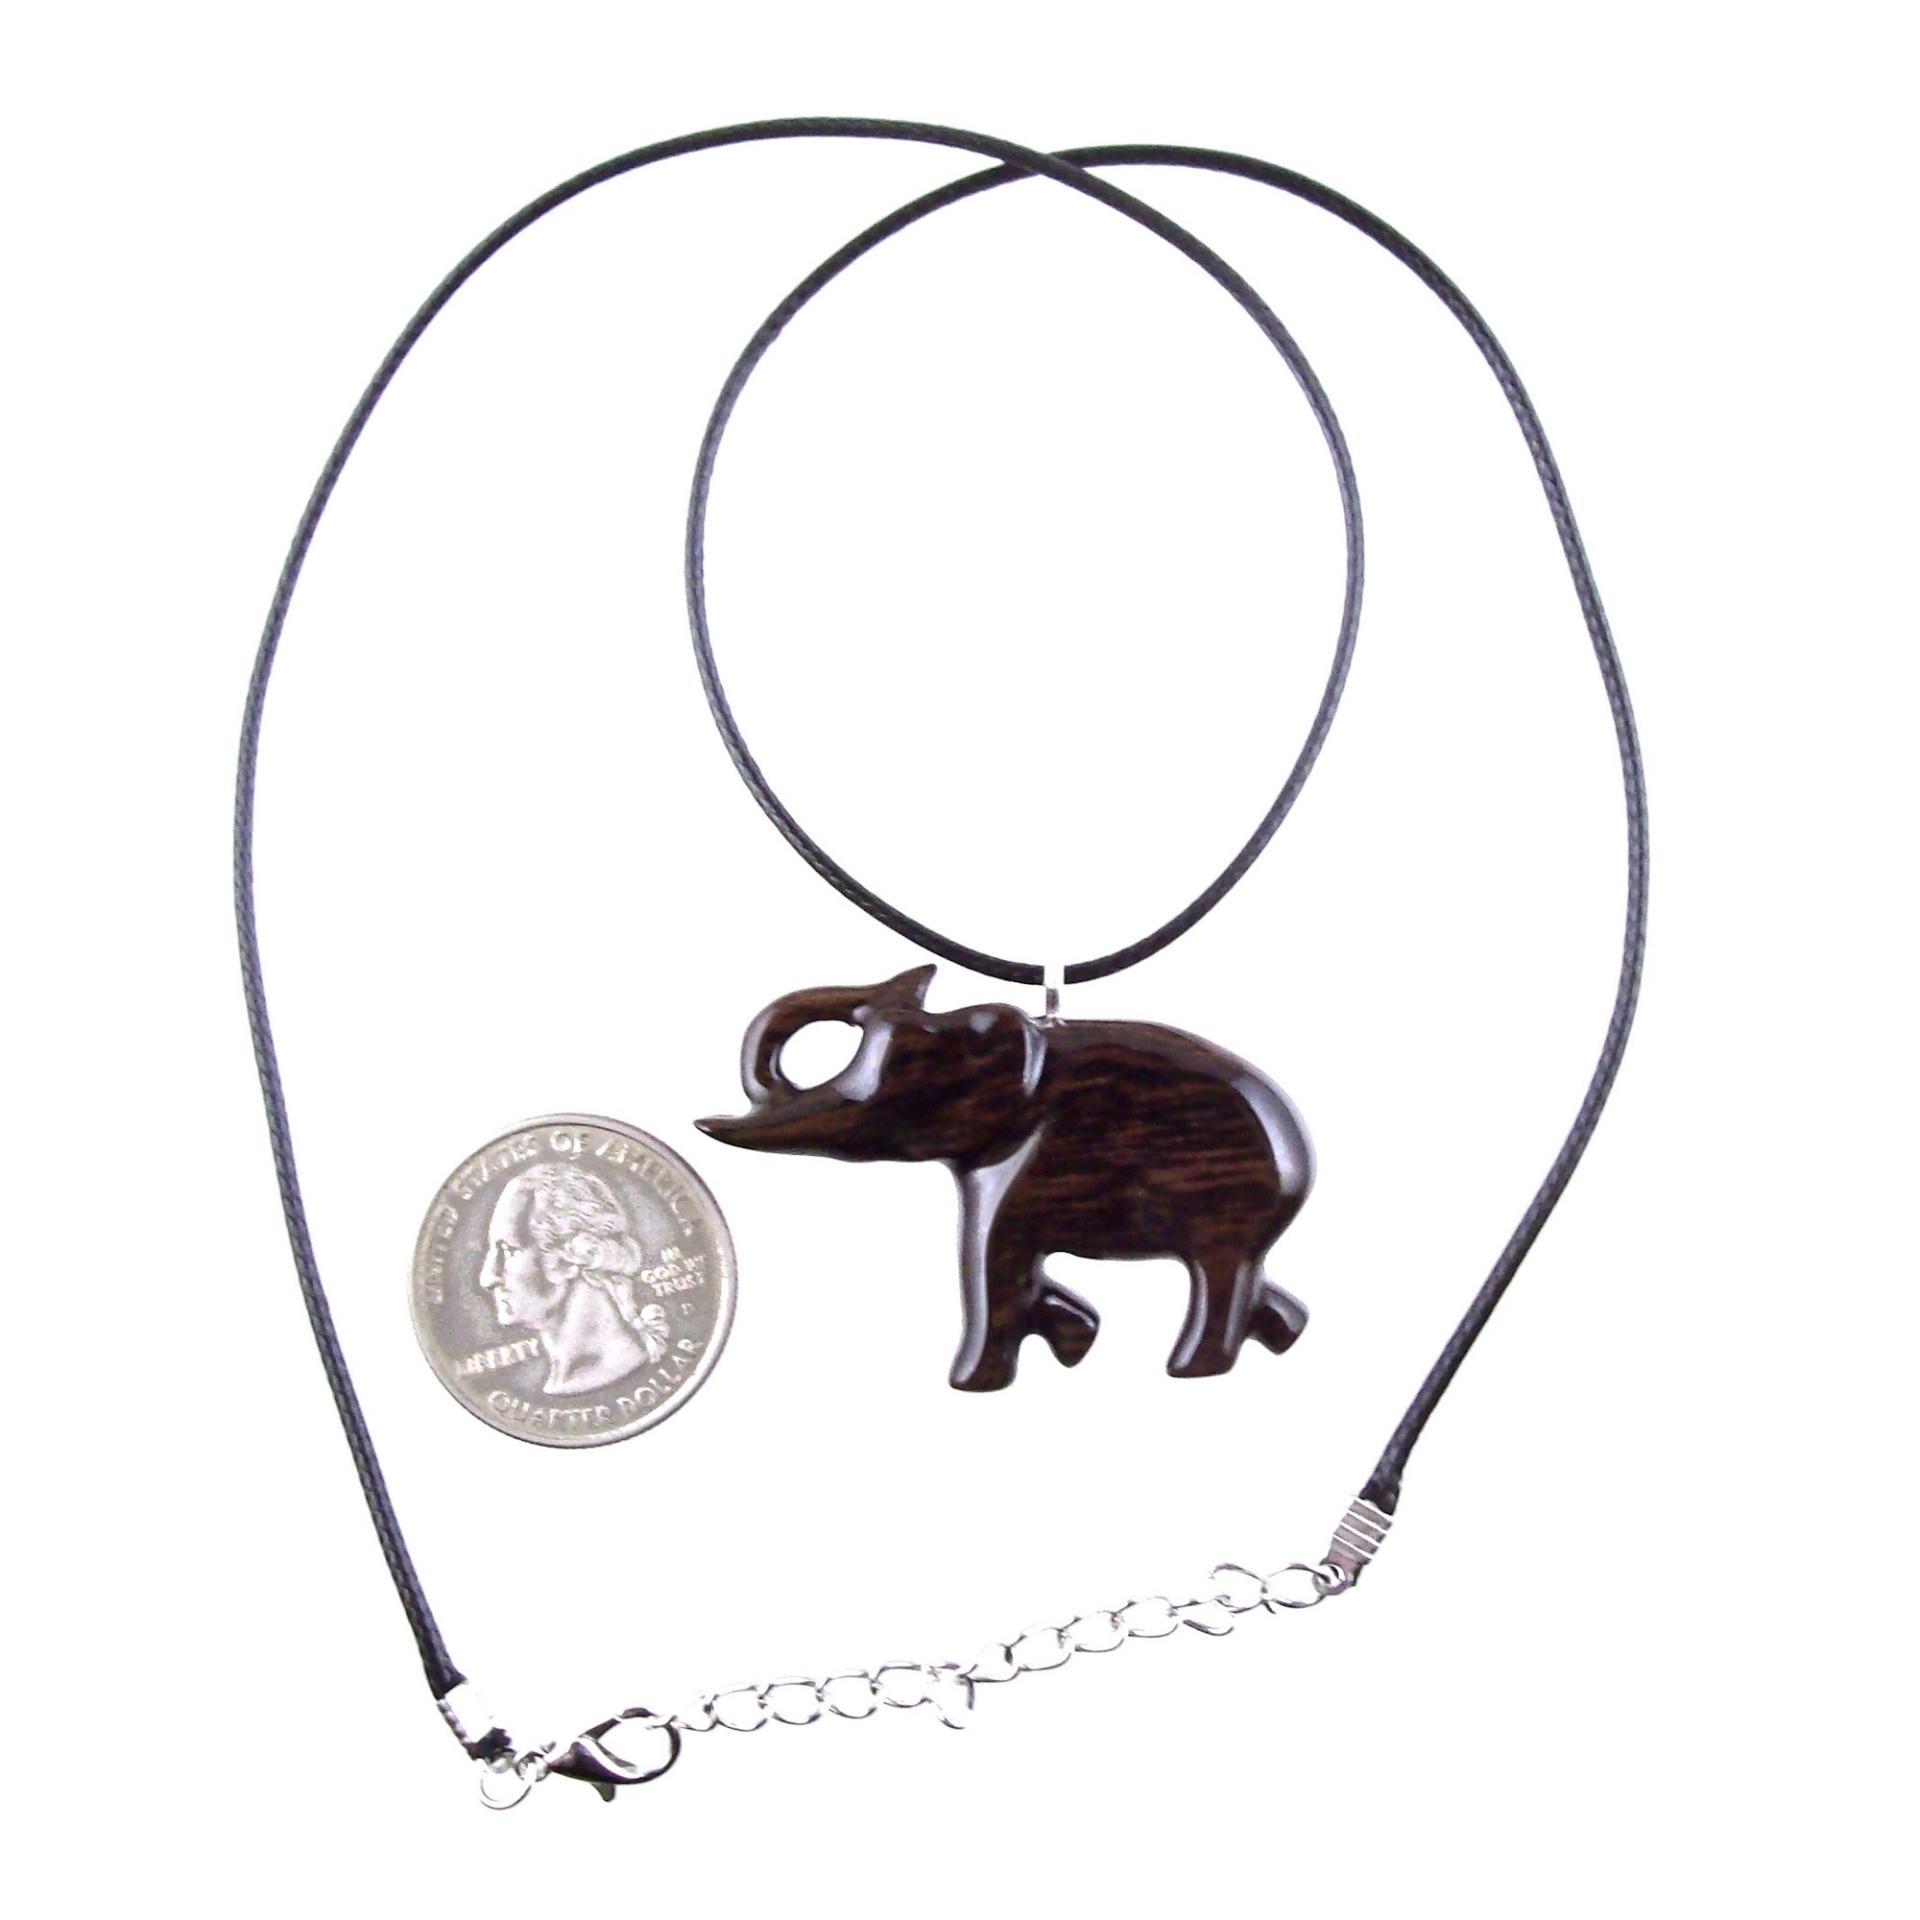 Wooden Elephant Pendant, Hand Carved Lucky Trunk Up Elephant Necklace for Men or Women, Spiritual Animal Wood Jewelry, Gift for Him Her